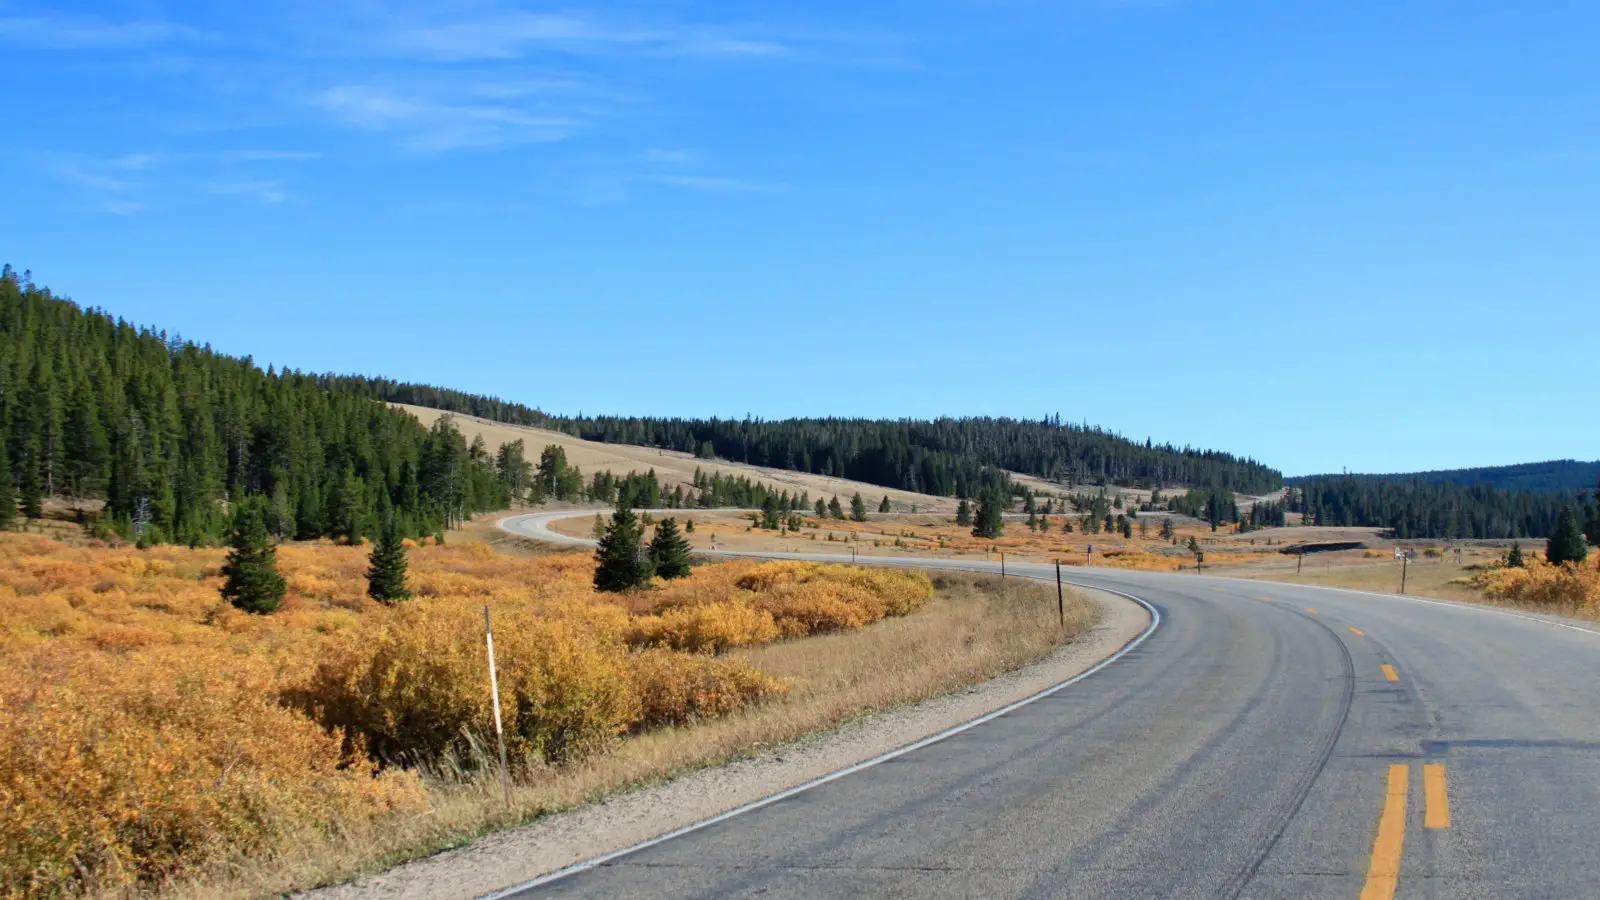 Winding road through Wyoming on our fall road trip to Yellowstone